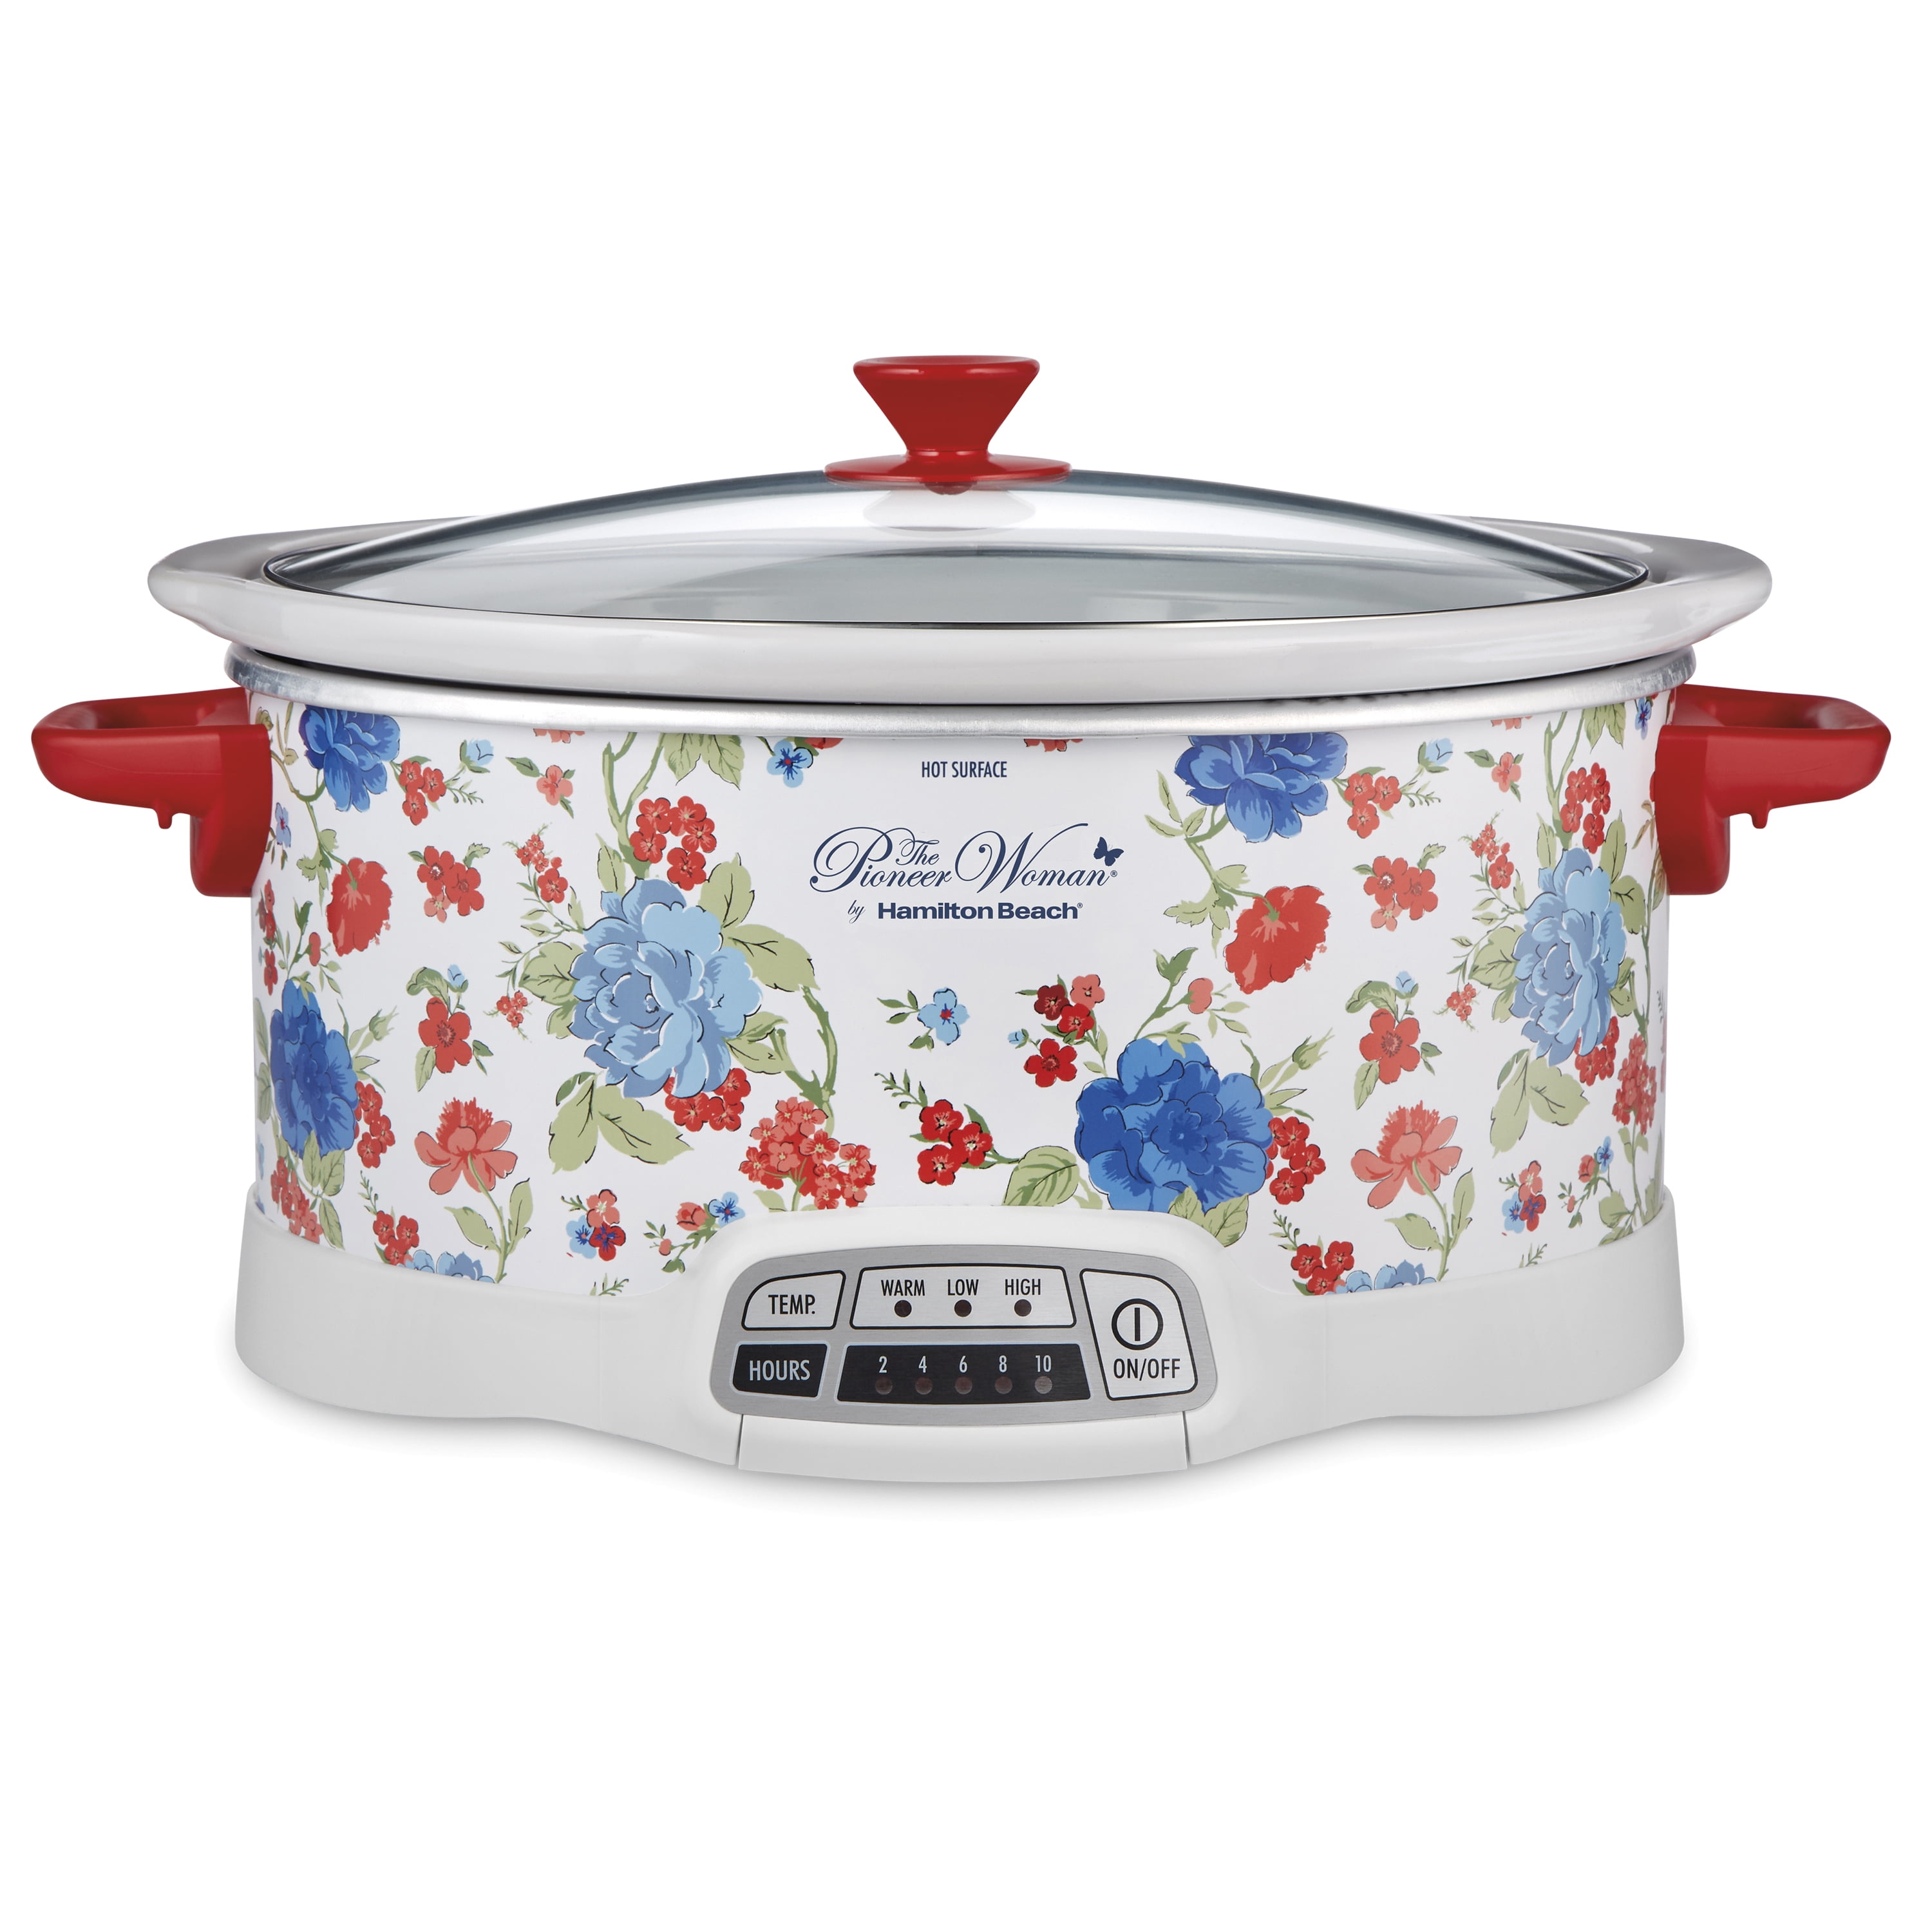 The Pioneer Woman 1.5 Quart Vintage Floral Slow Cooker Crock Pot Cooking  Pot, model #33016 by Hamilton Beach: Buy Online at Best Price in UAE 